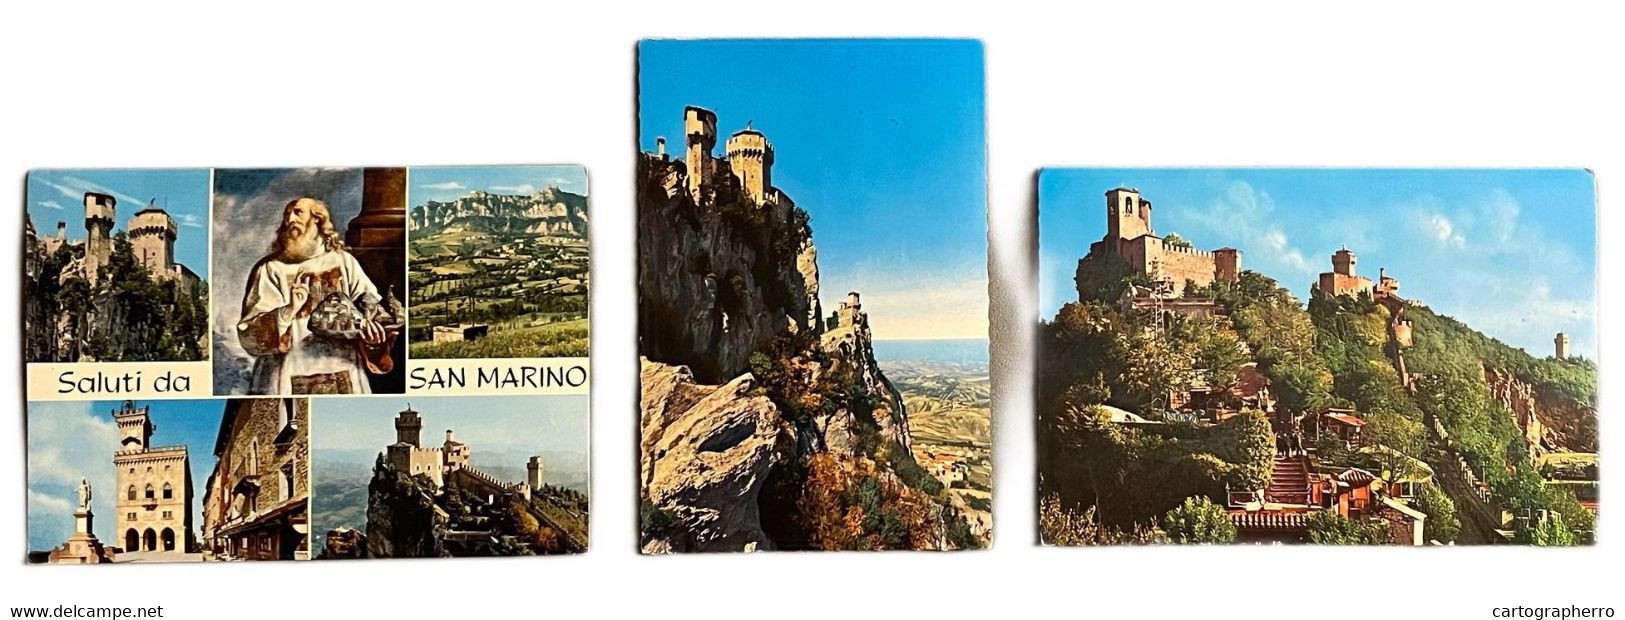 Lot 3 extra size postcards SAN MARINO atypical 13 x 19 cm multi nice franking stamps local motifs sports & fauna topical